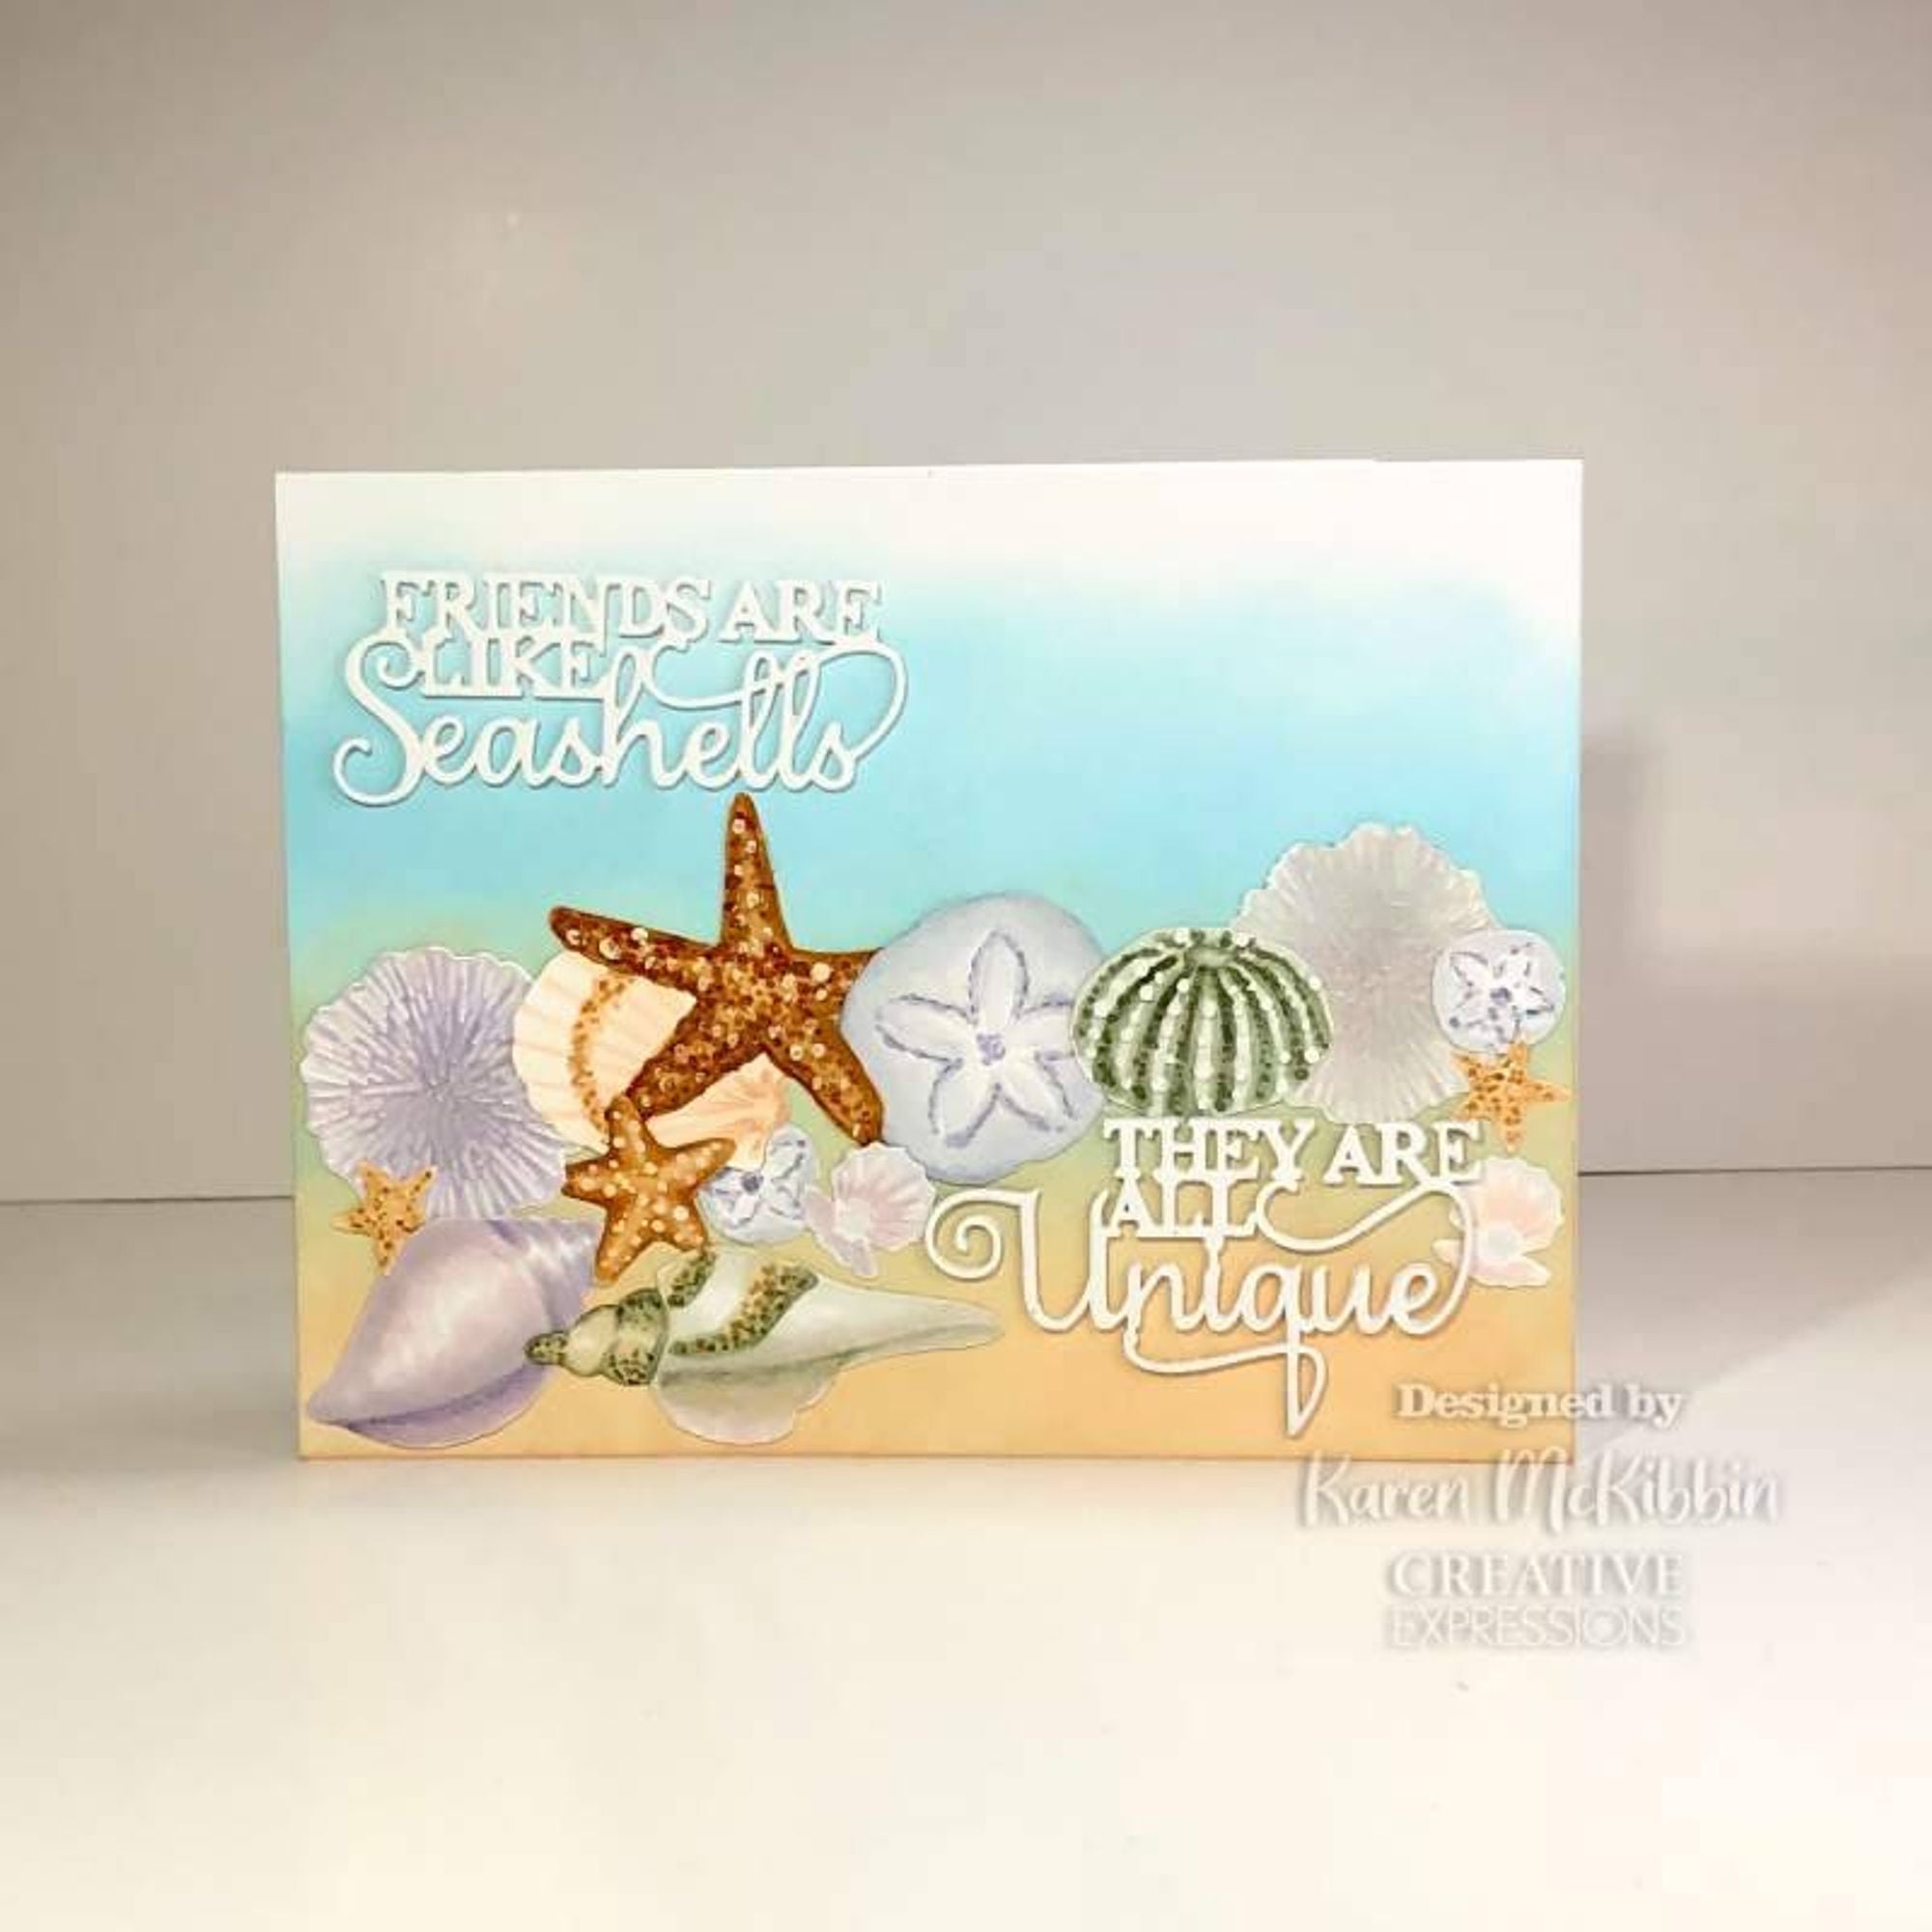 Creative Expressions Sue Wilson Mini Expressions Duo Friends Are Like Seashells Craft Die